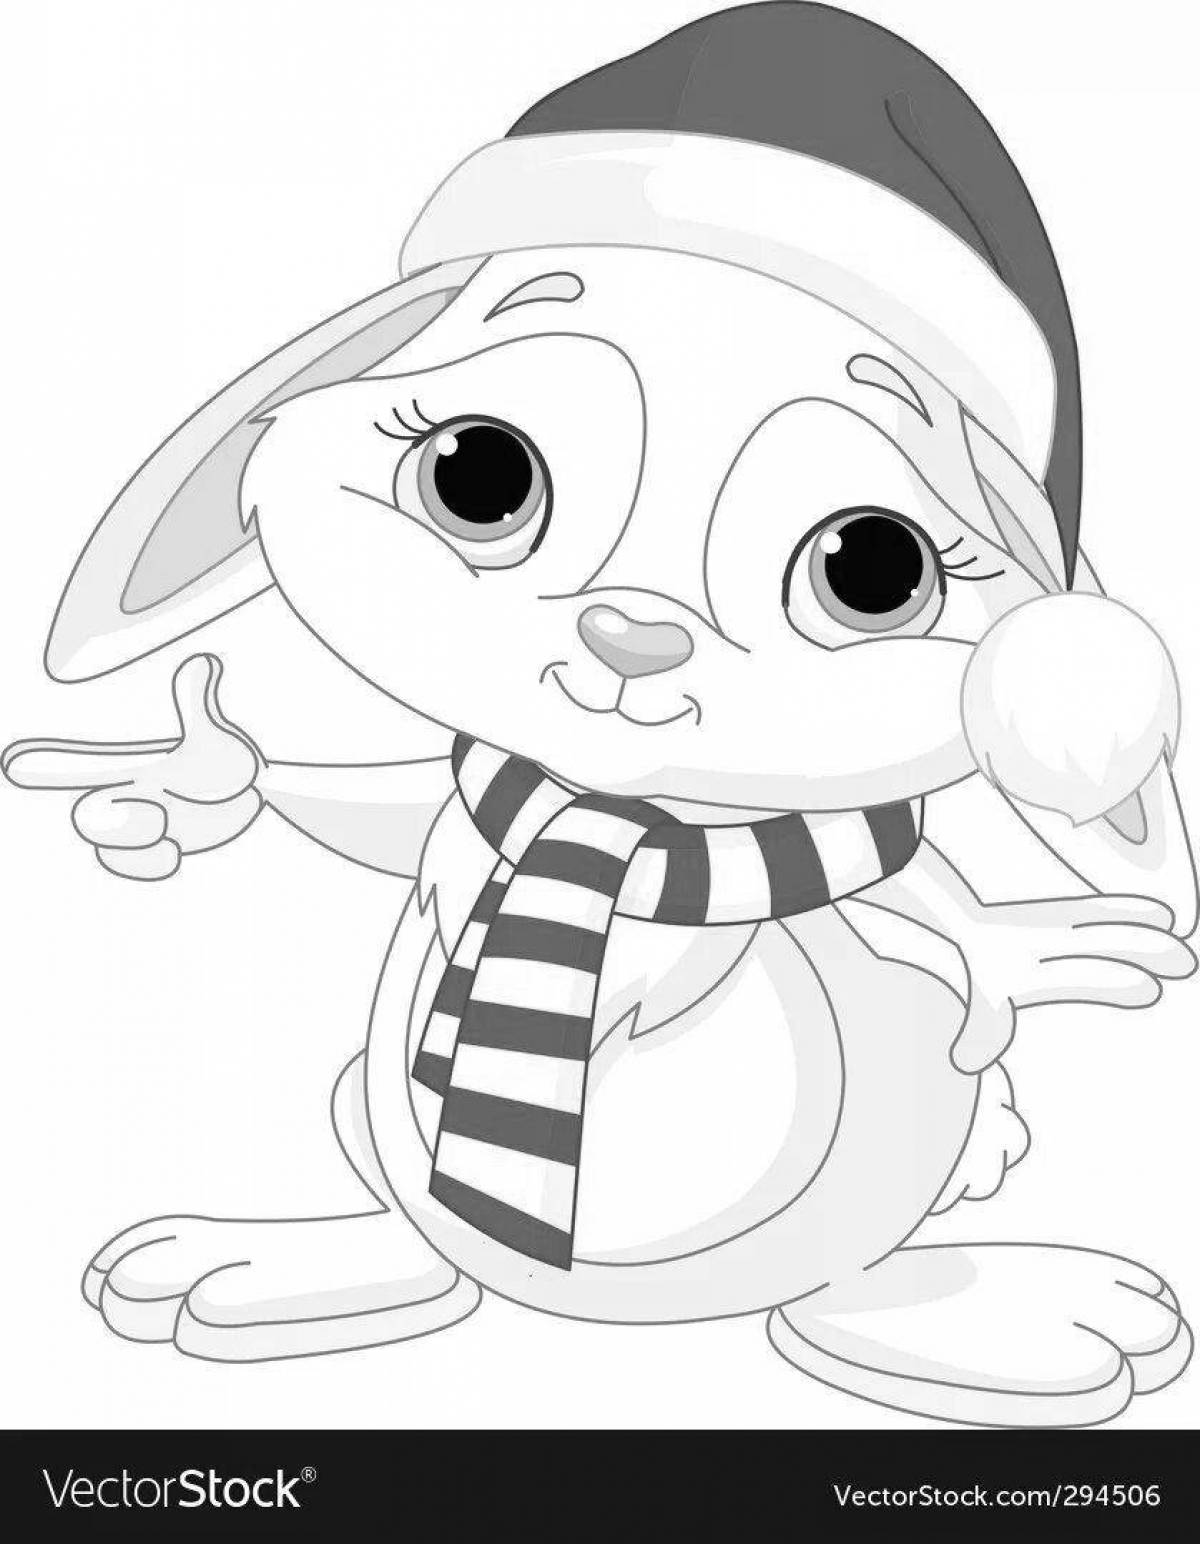 Friendly bunny coloring with a hat